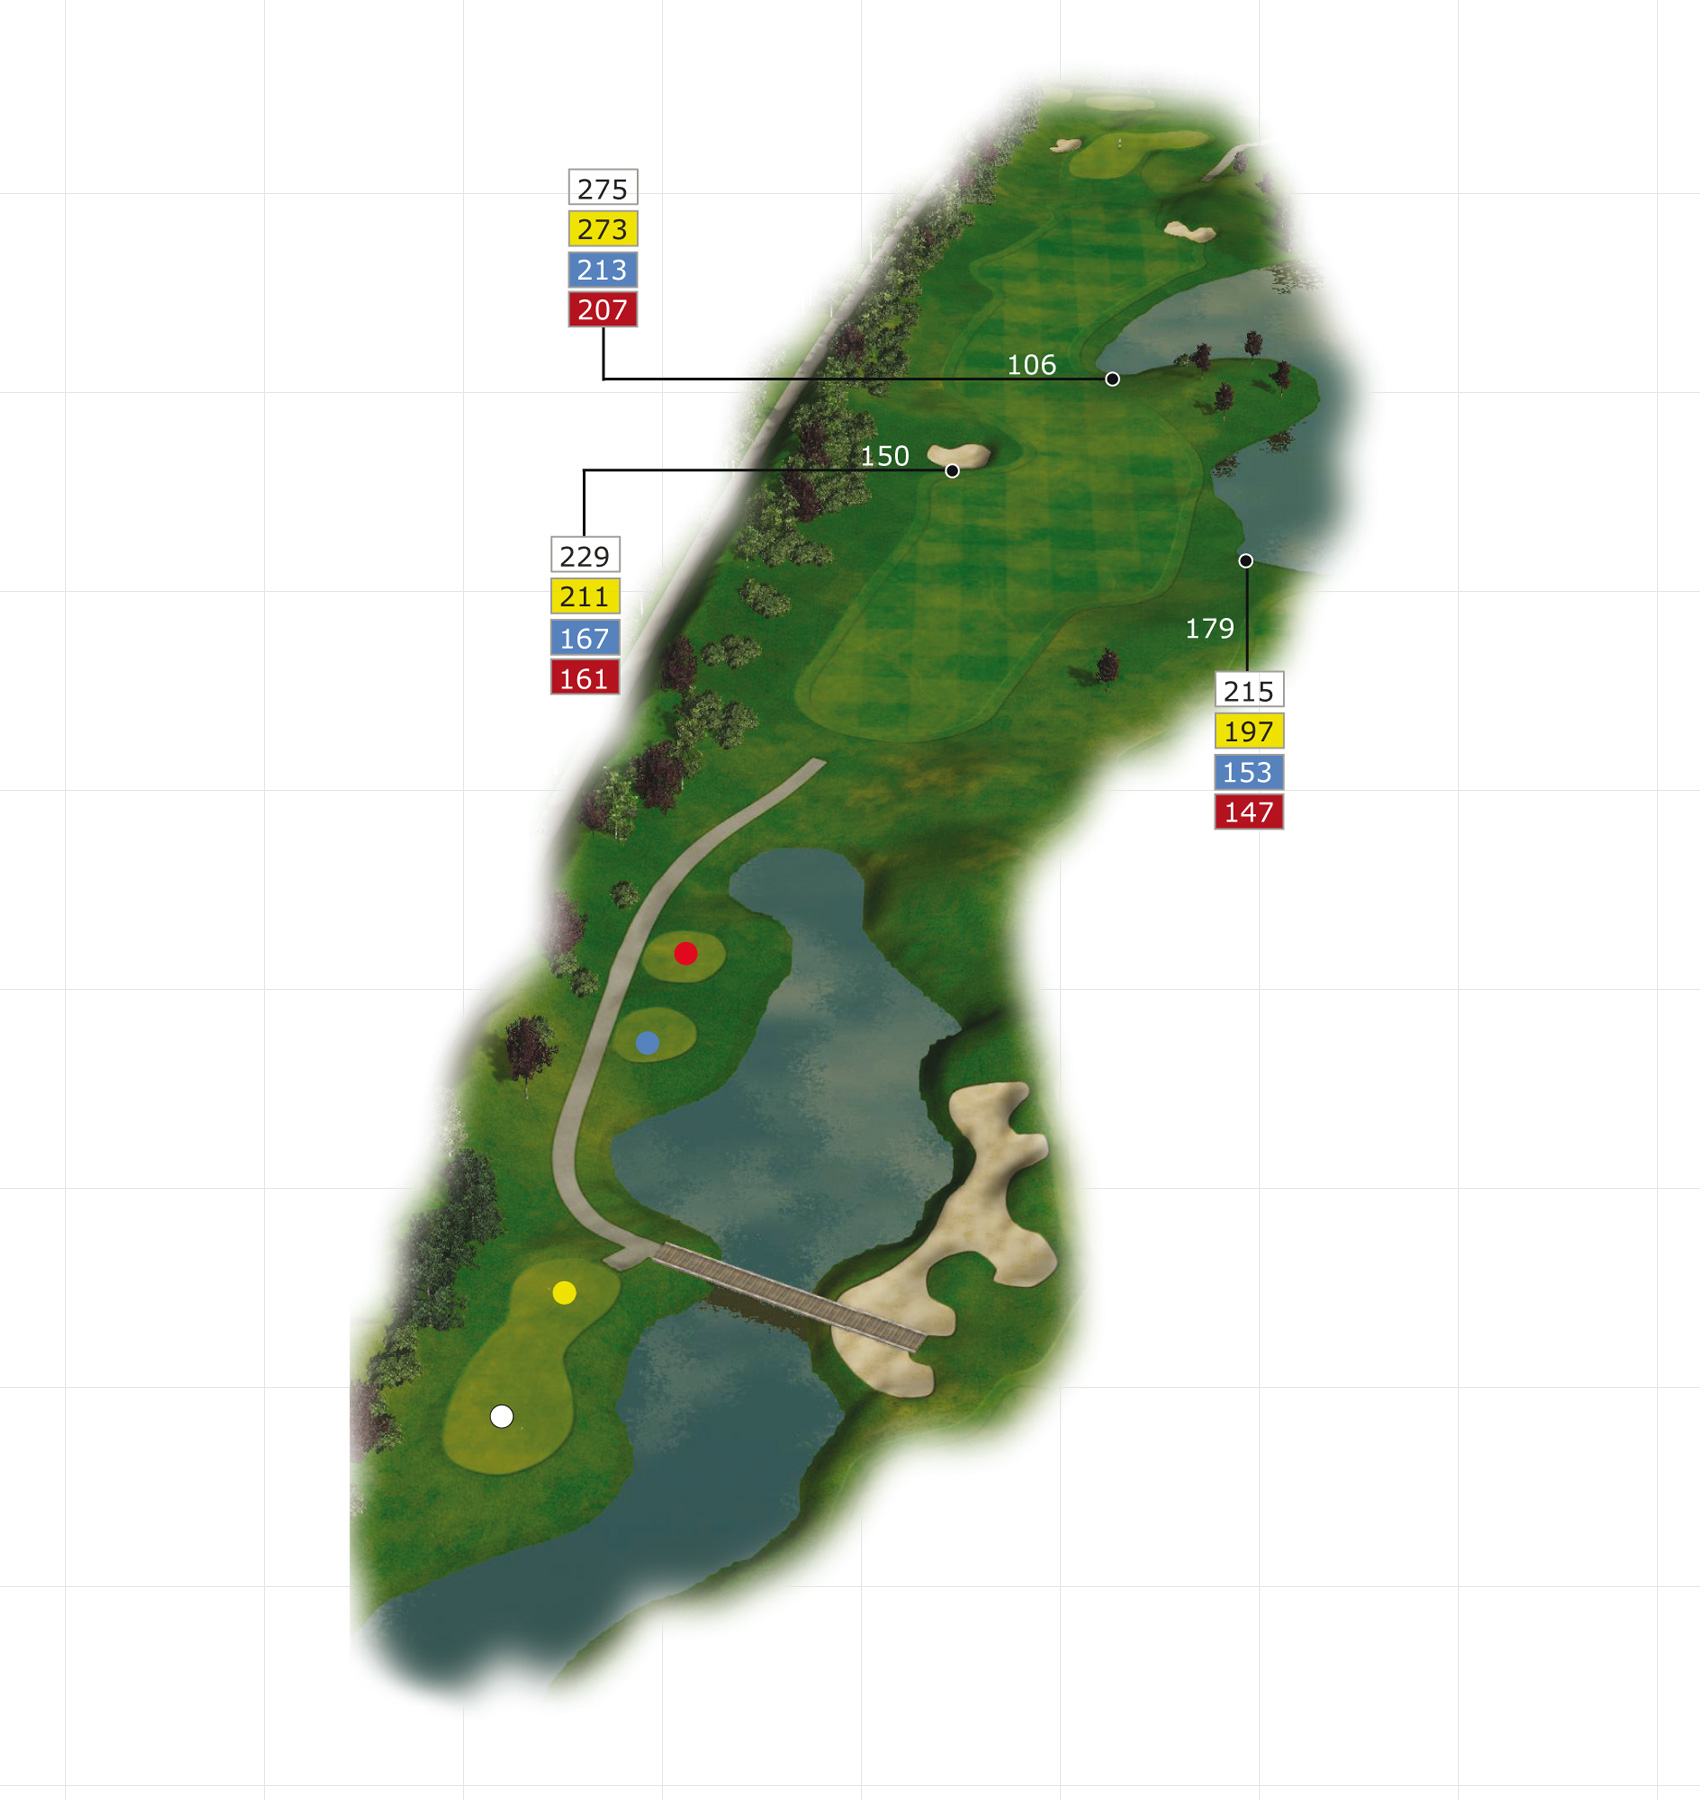 hole8.png